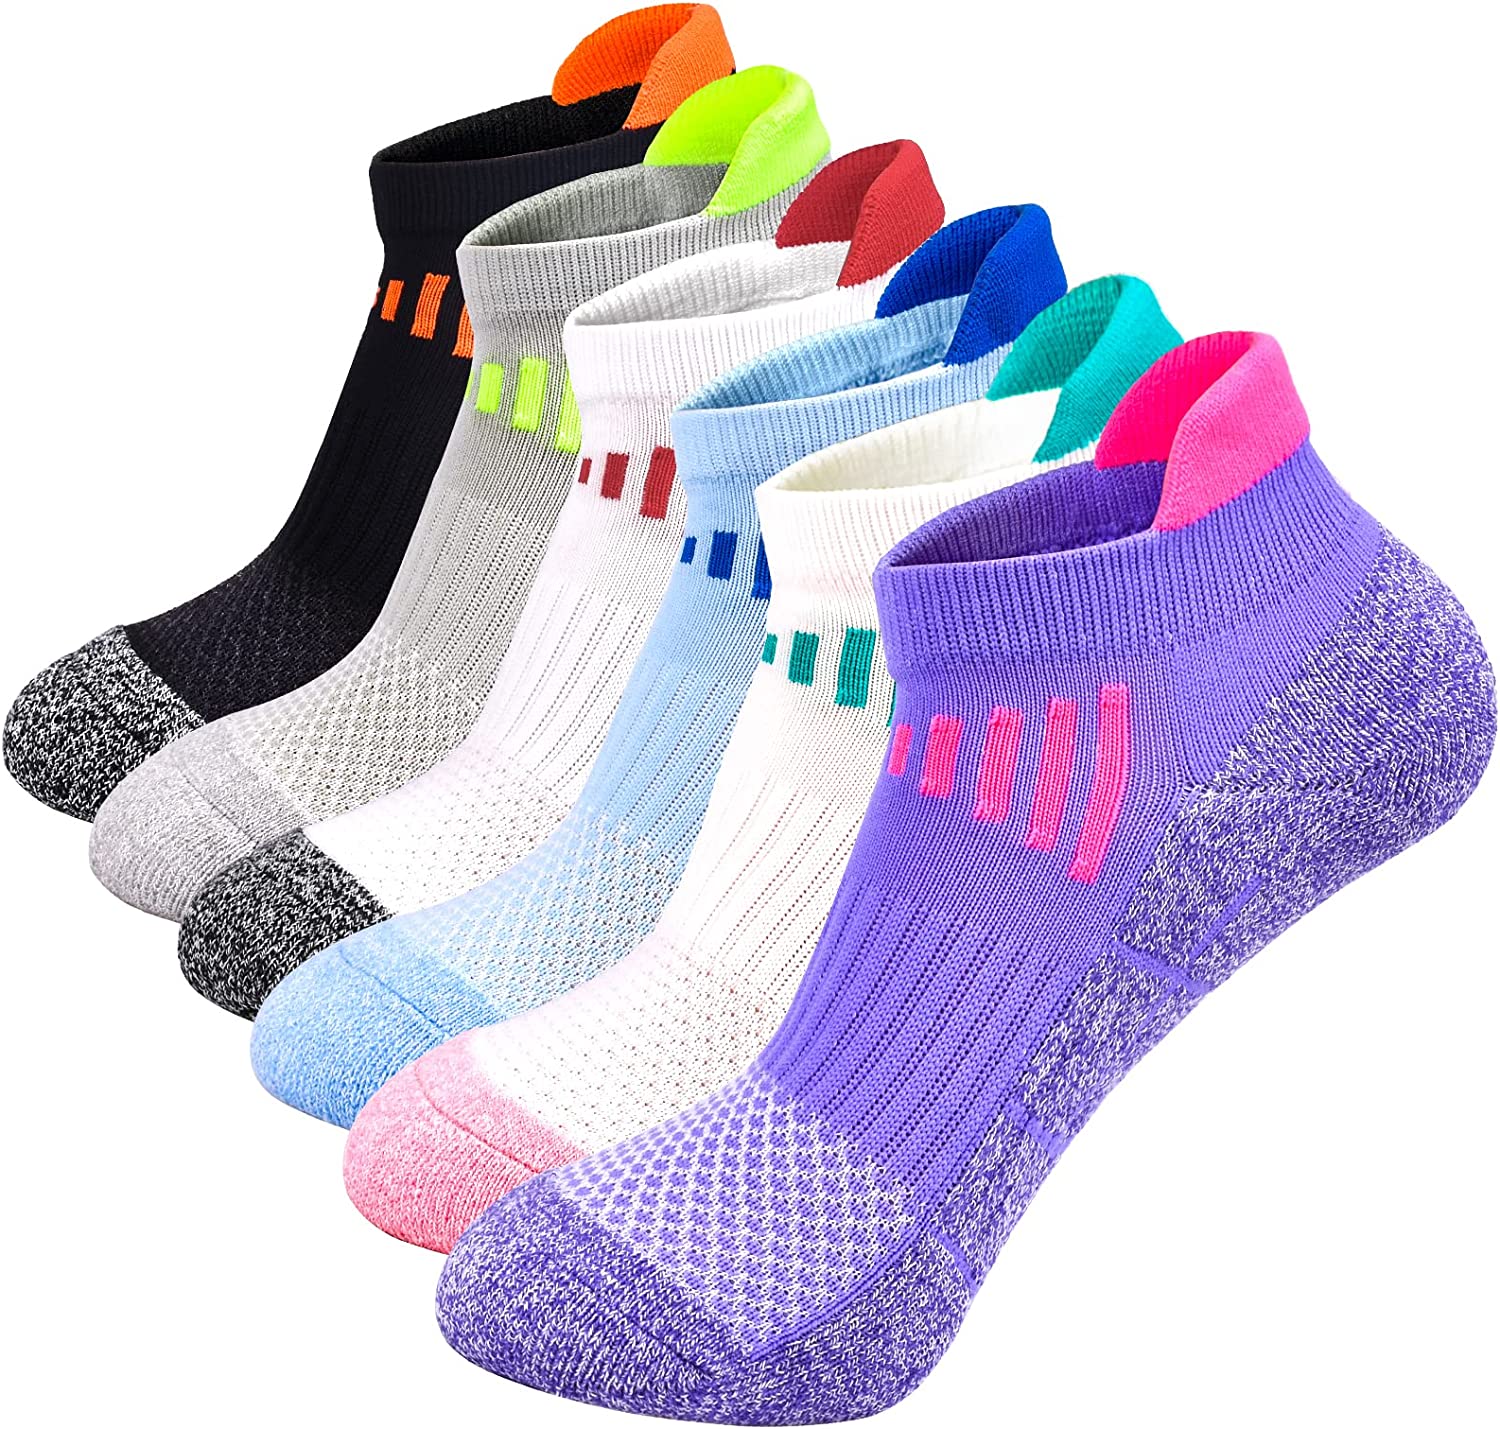 Womens Ankle Athletic Socks Low Cut Cushioned Breathable Running Performance  Spo | eBay